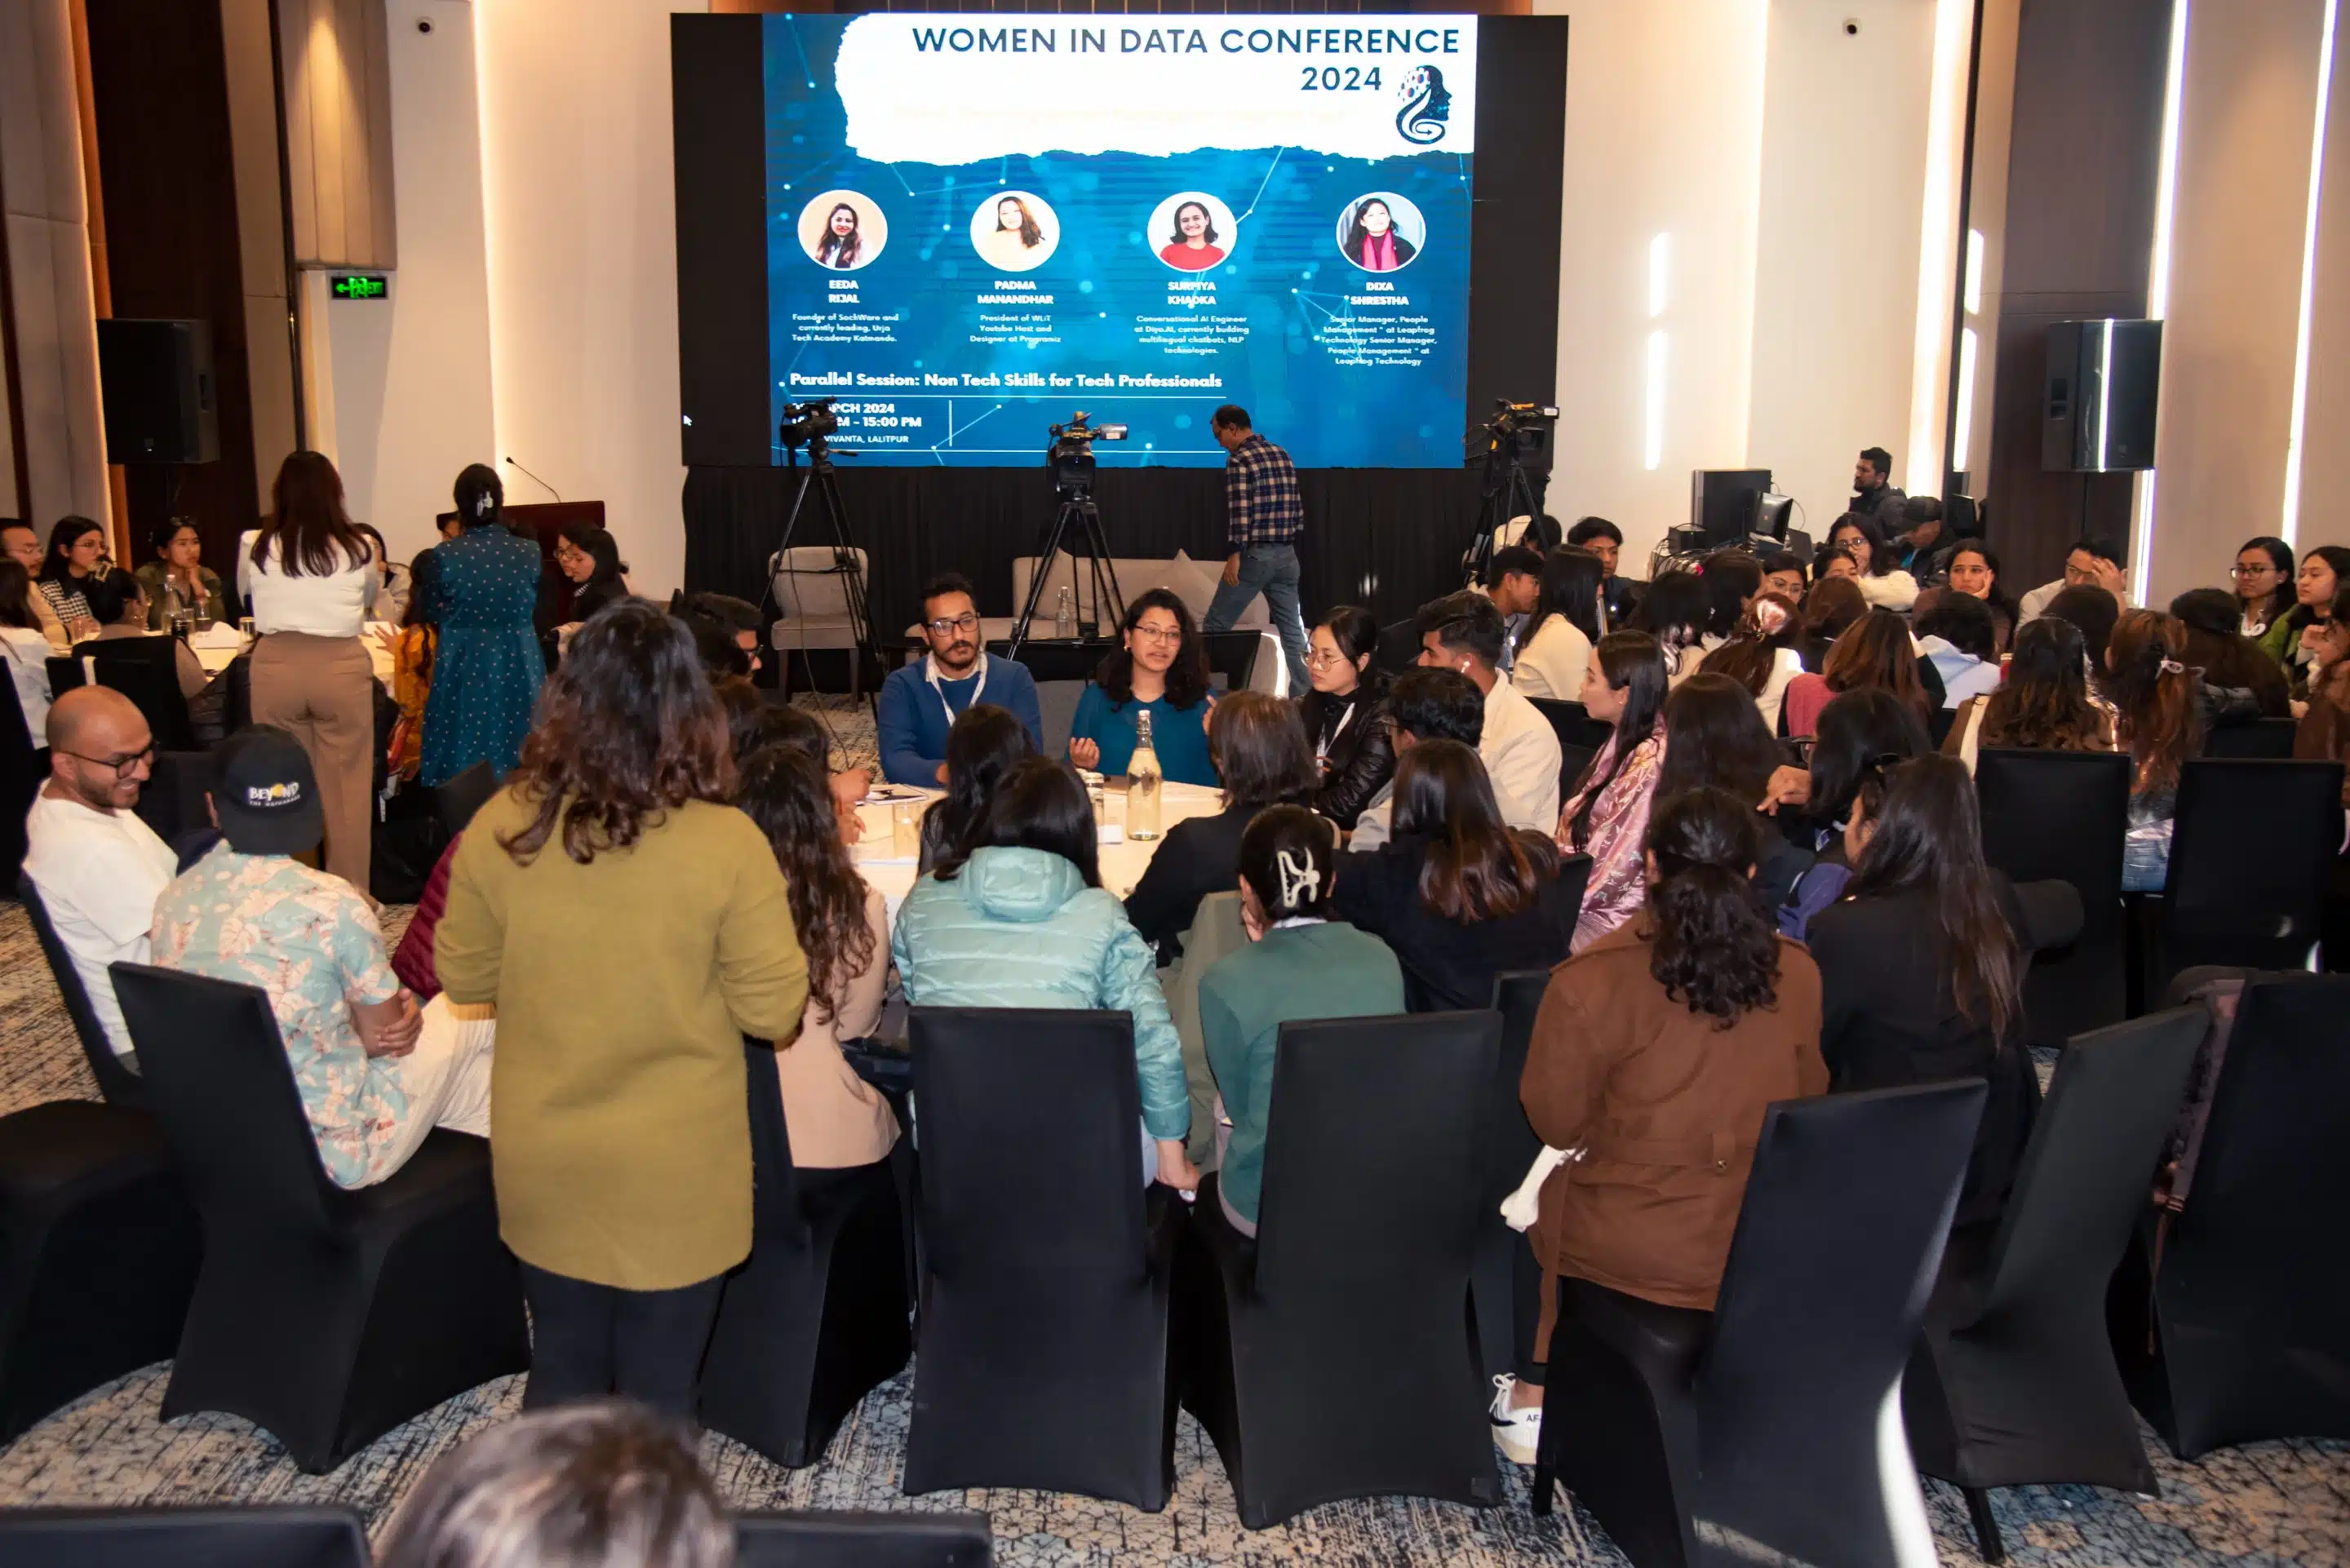 A large group sit in a circle at a roundtable. There is a Women in Data Conference panel session graphic on the screen behind them.